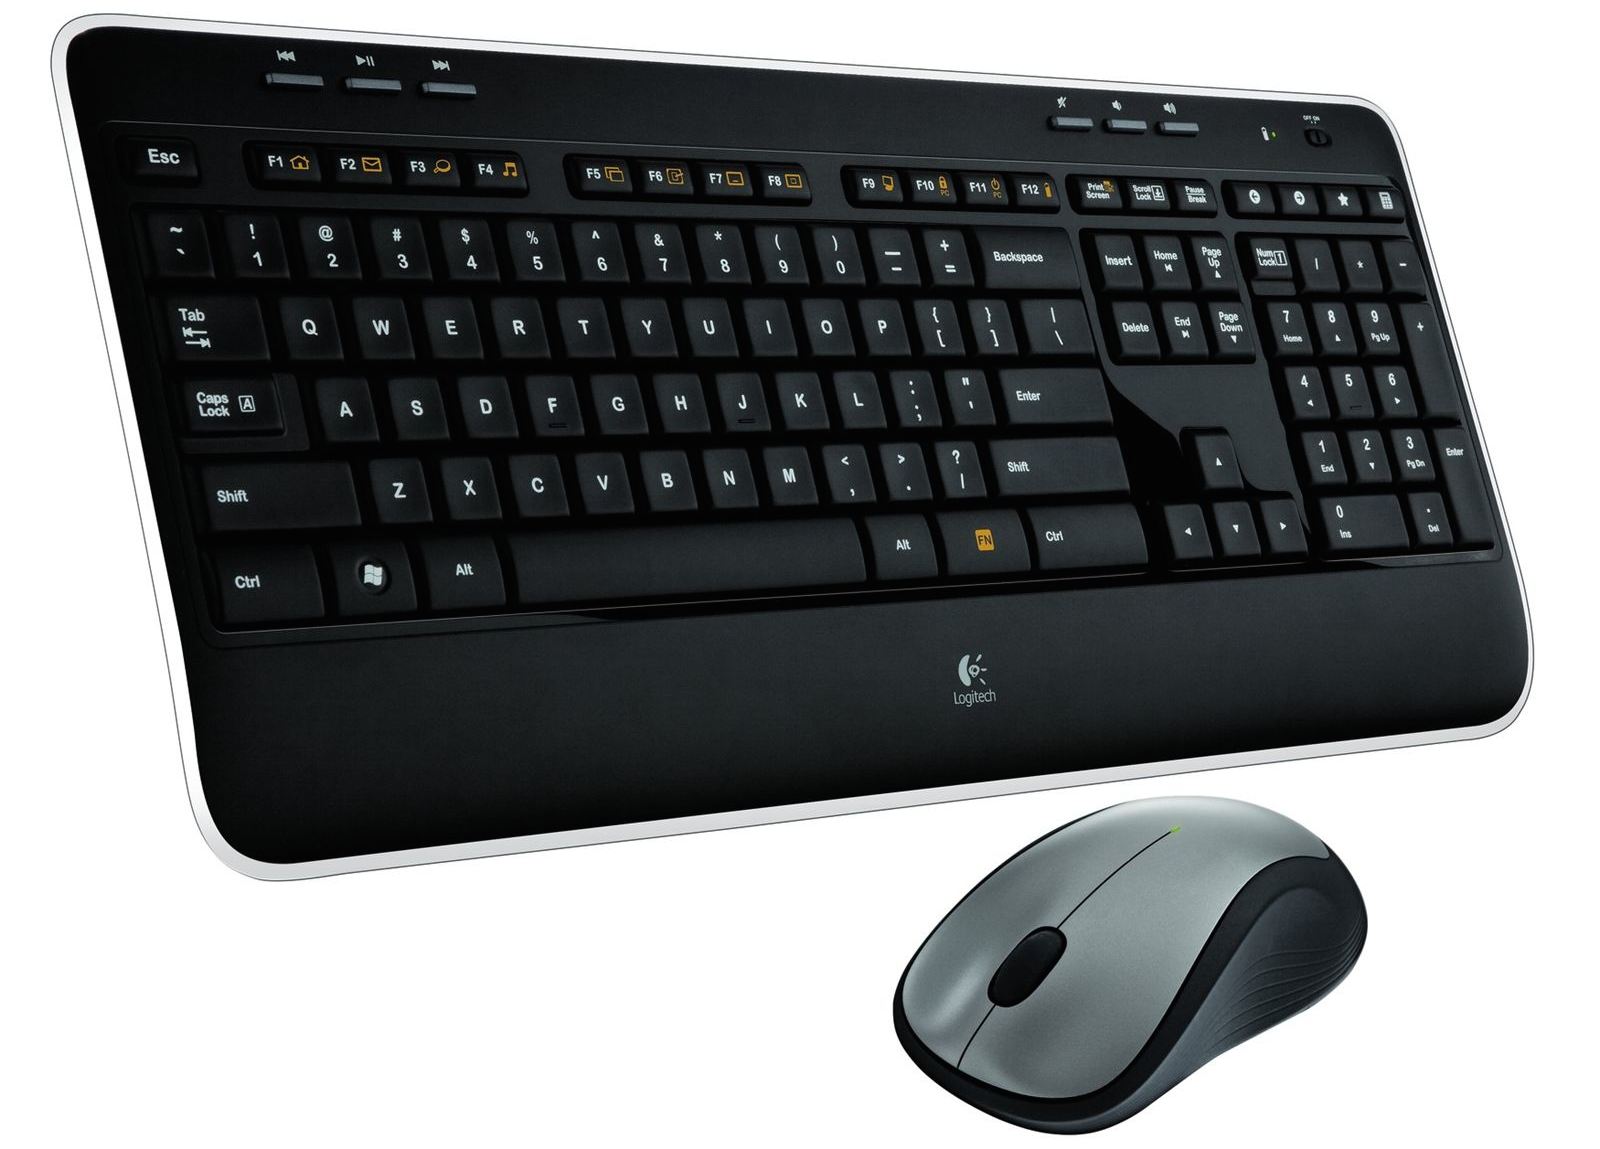 install logitech mouse and keyboard software setpoint